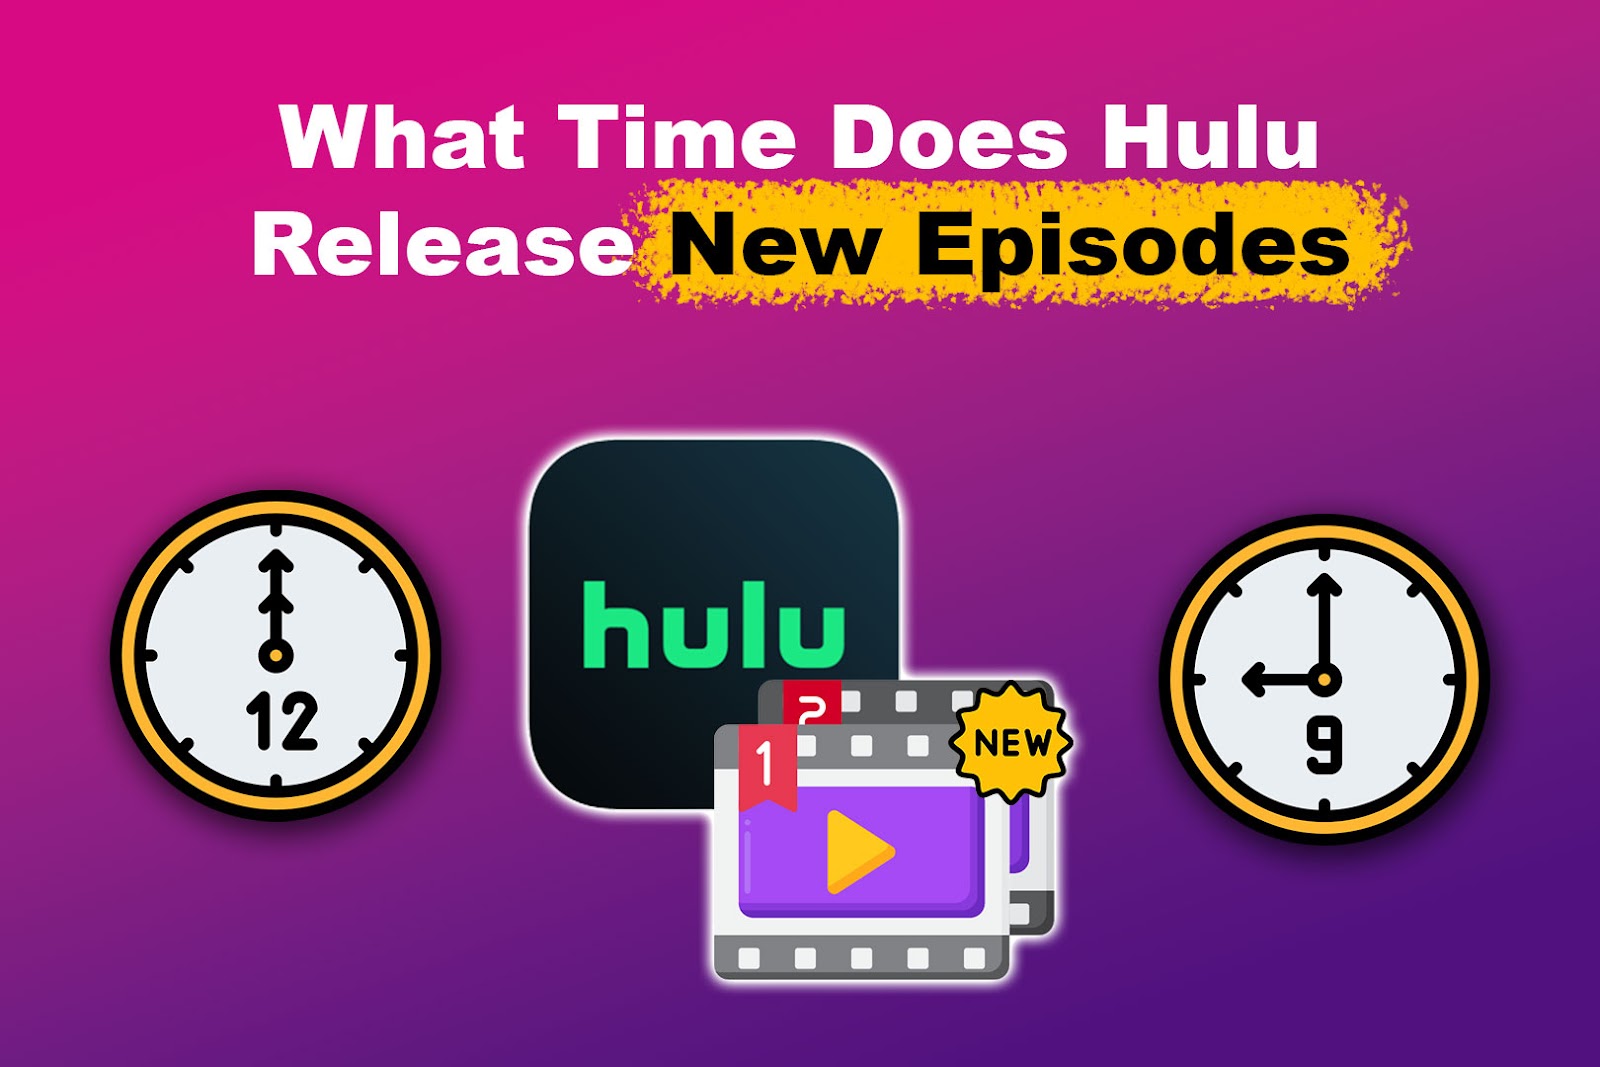 What Time Does Hulu Release New Episodes